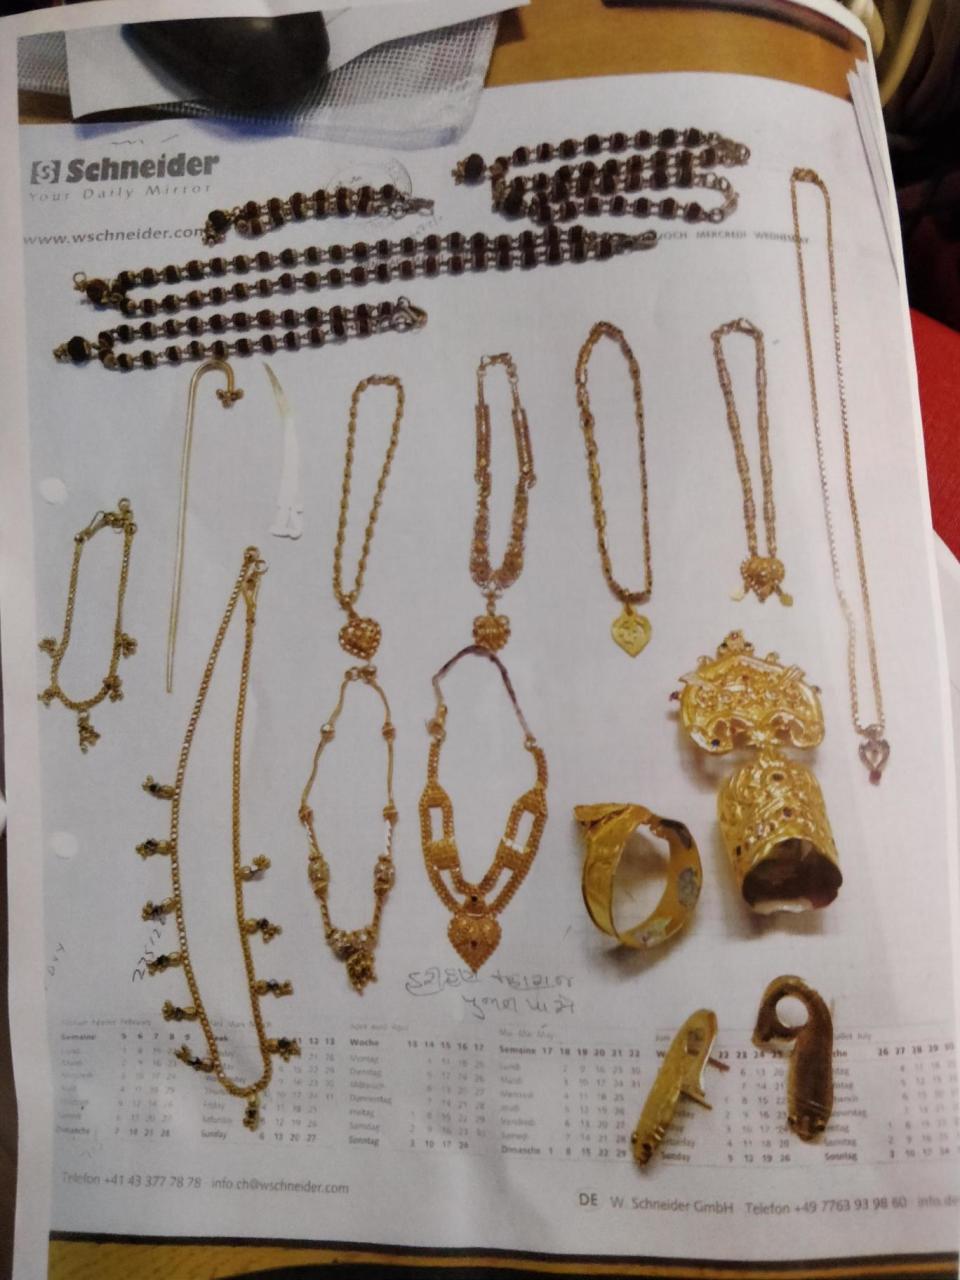 Some of the items taken from the Shri Kutch Satsang Swaminarayan Temple in Harrow (Met Police)